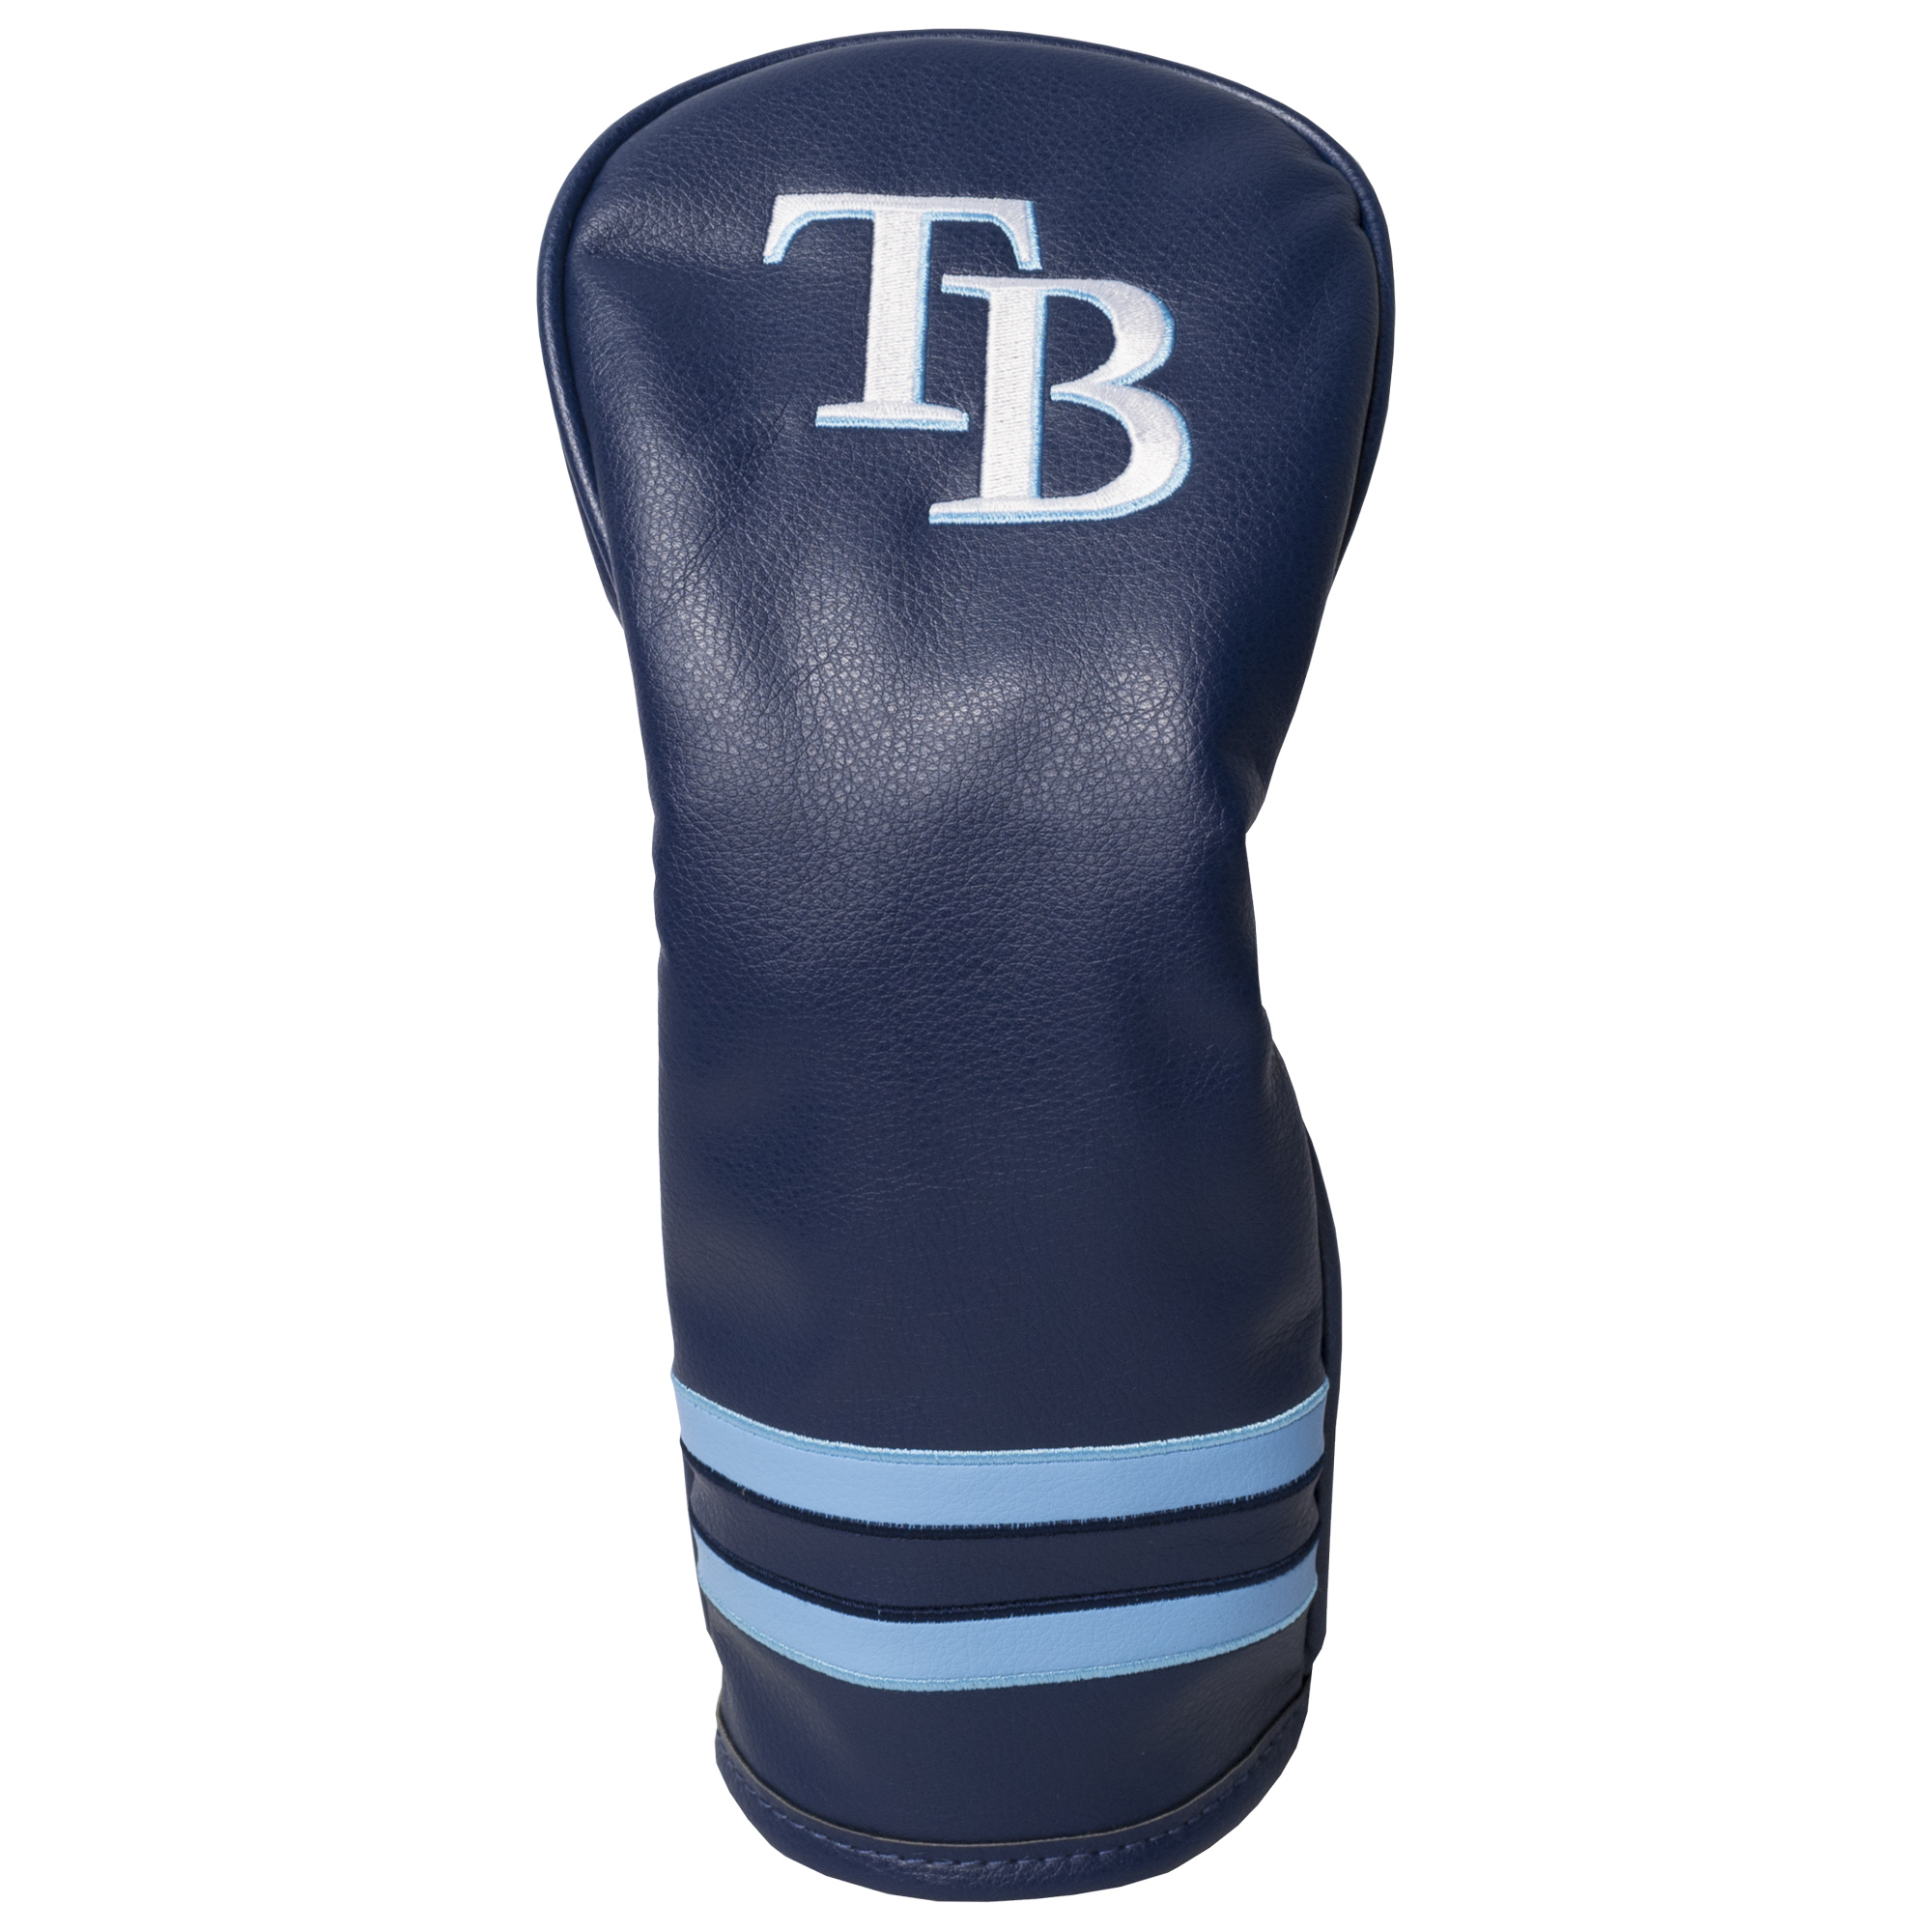 Tampa Bay Rays Vintage Fairway Headcover